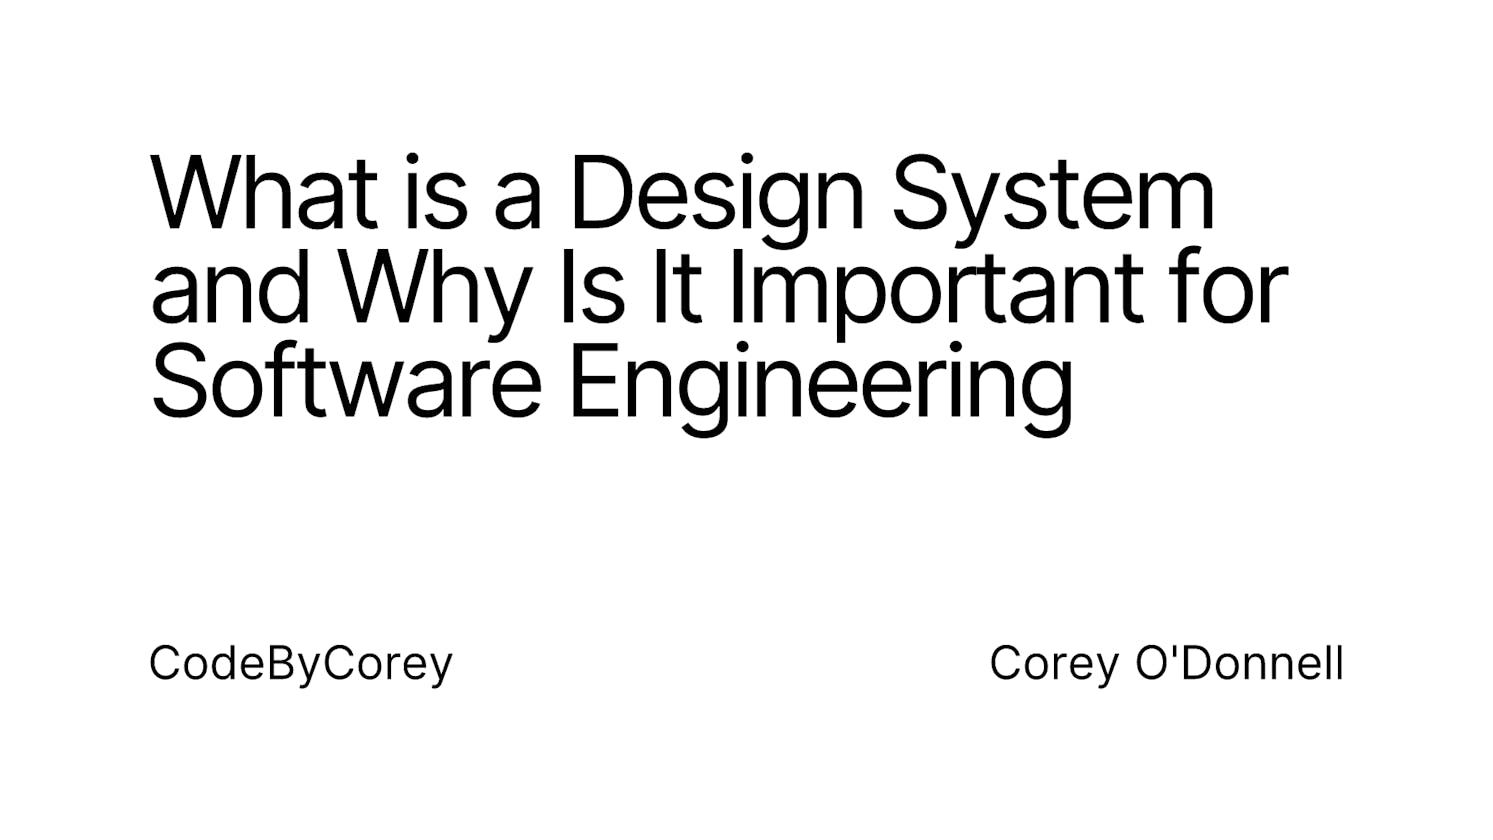 What is a Design System and Why Is It Important for Software Engineering?